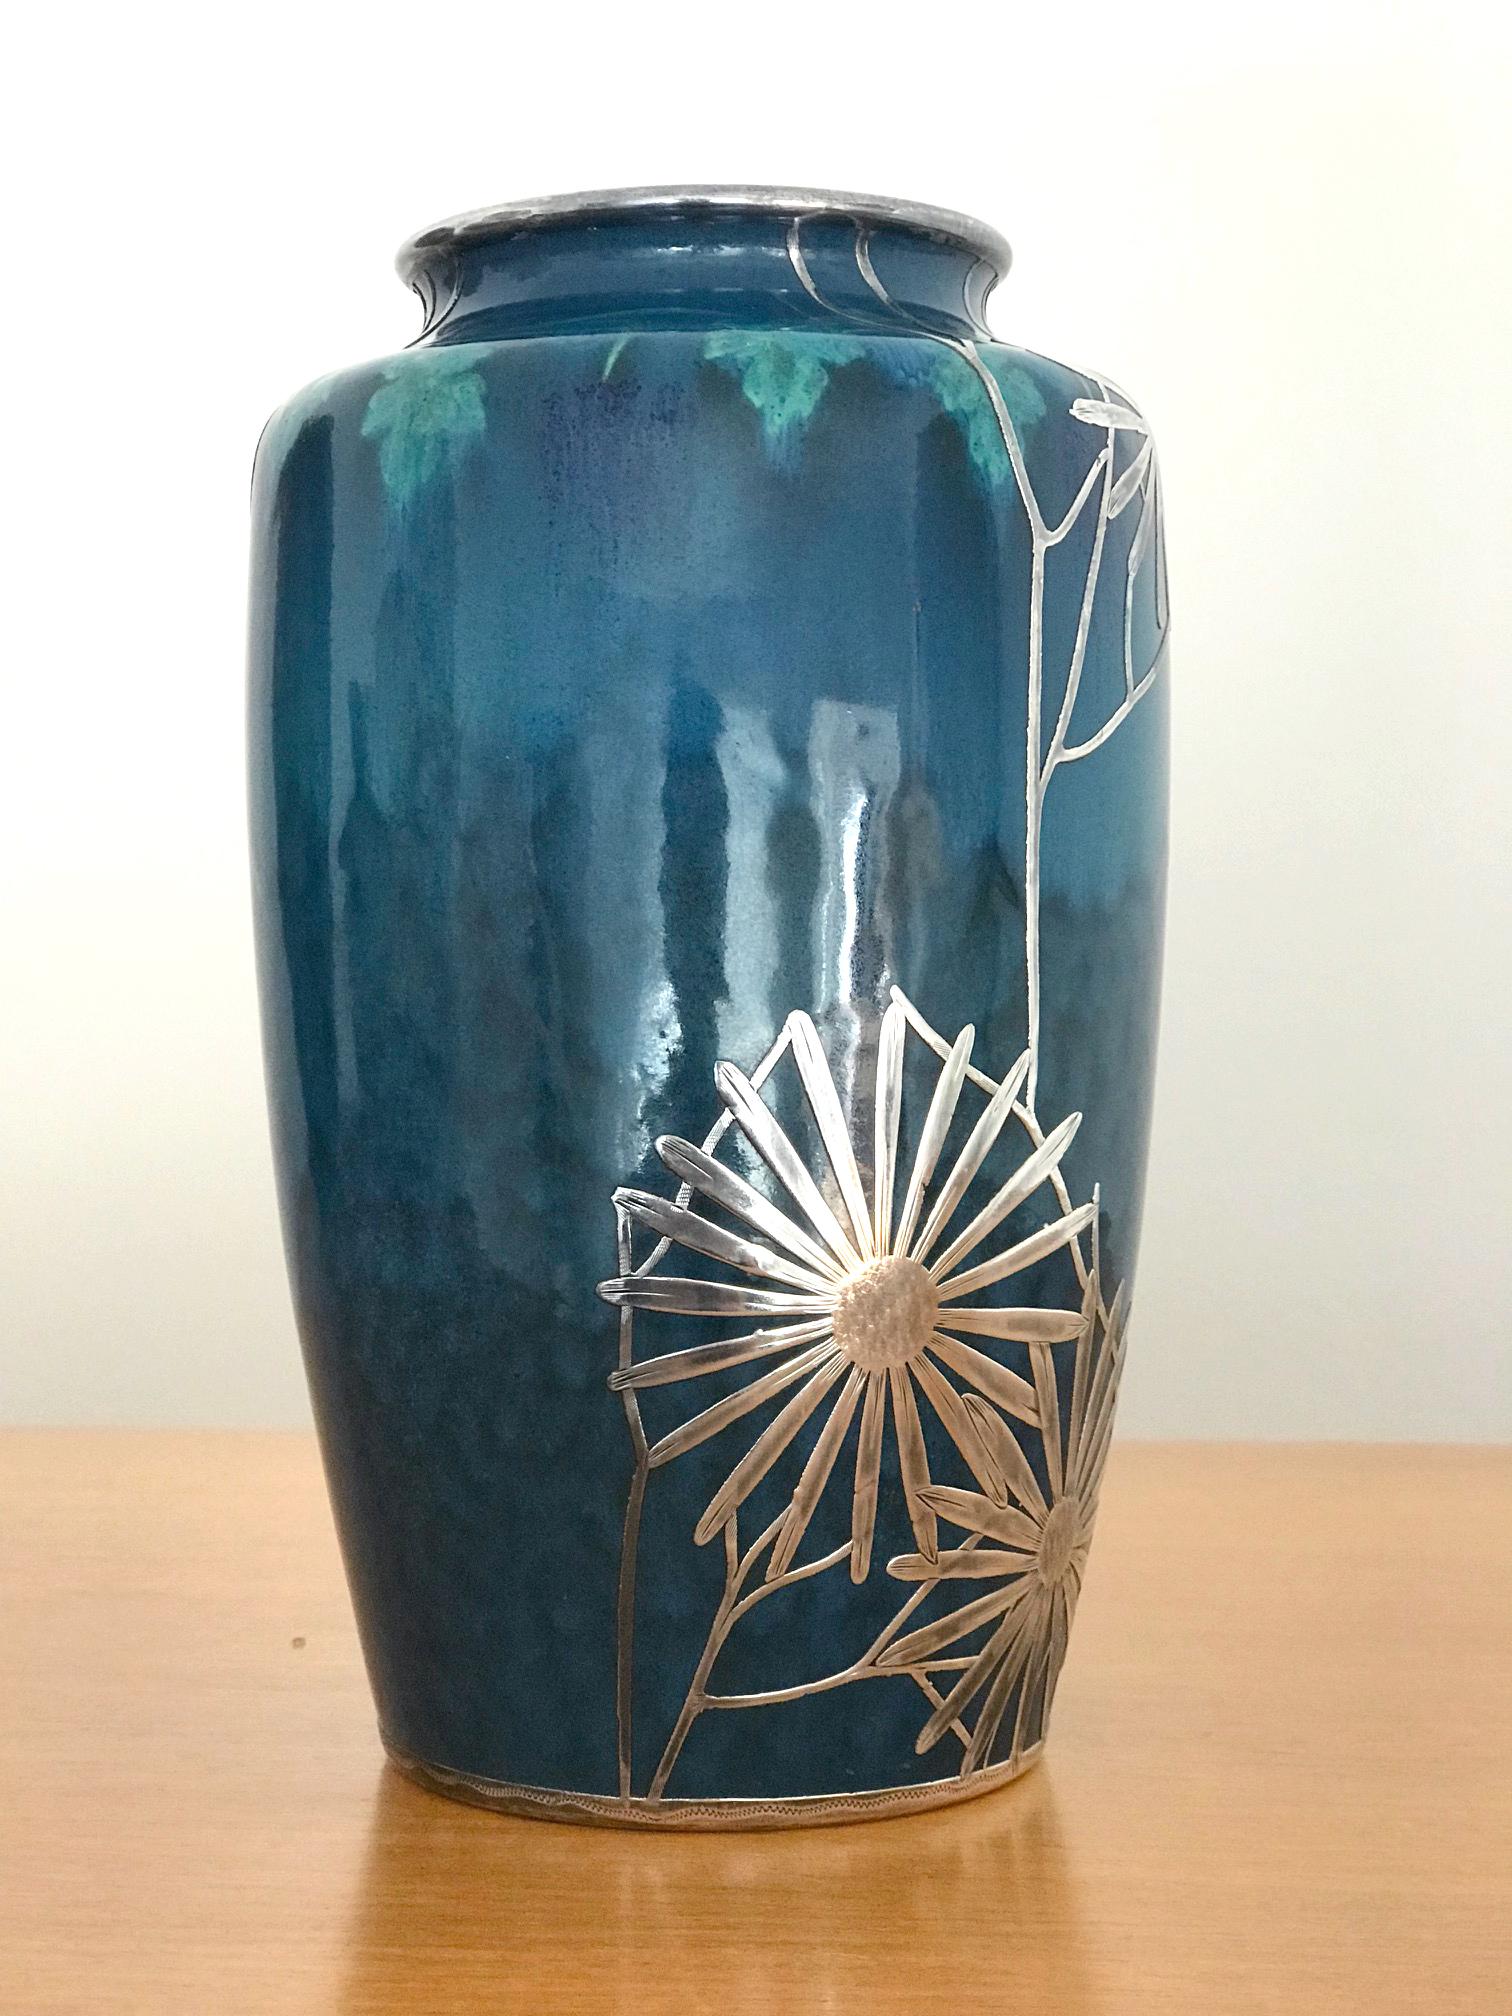 English Art Nouveau Vase by Ruskin Pottery with Shreve & Co. Silver Overlay